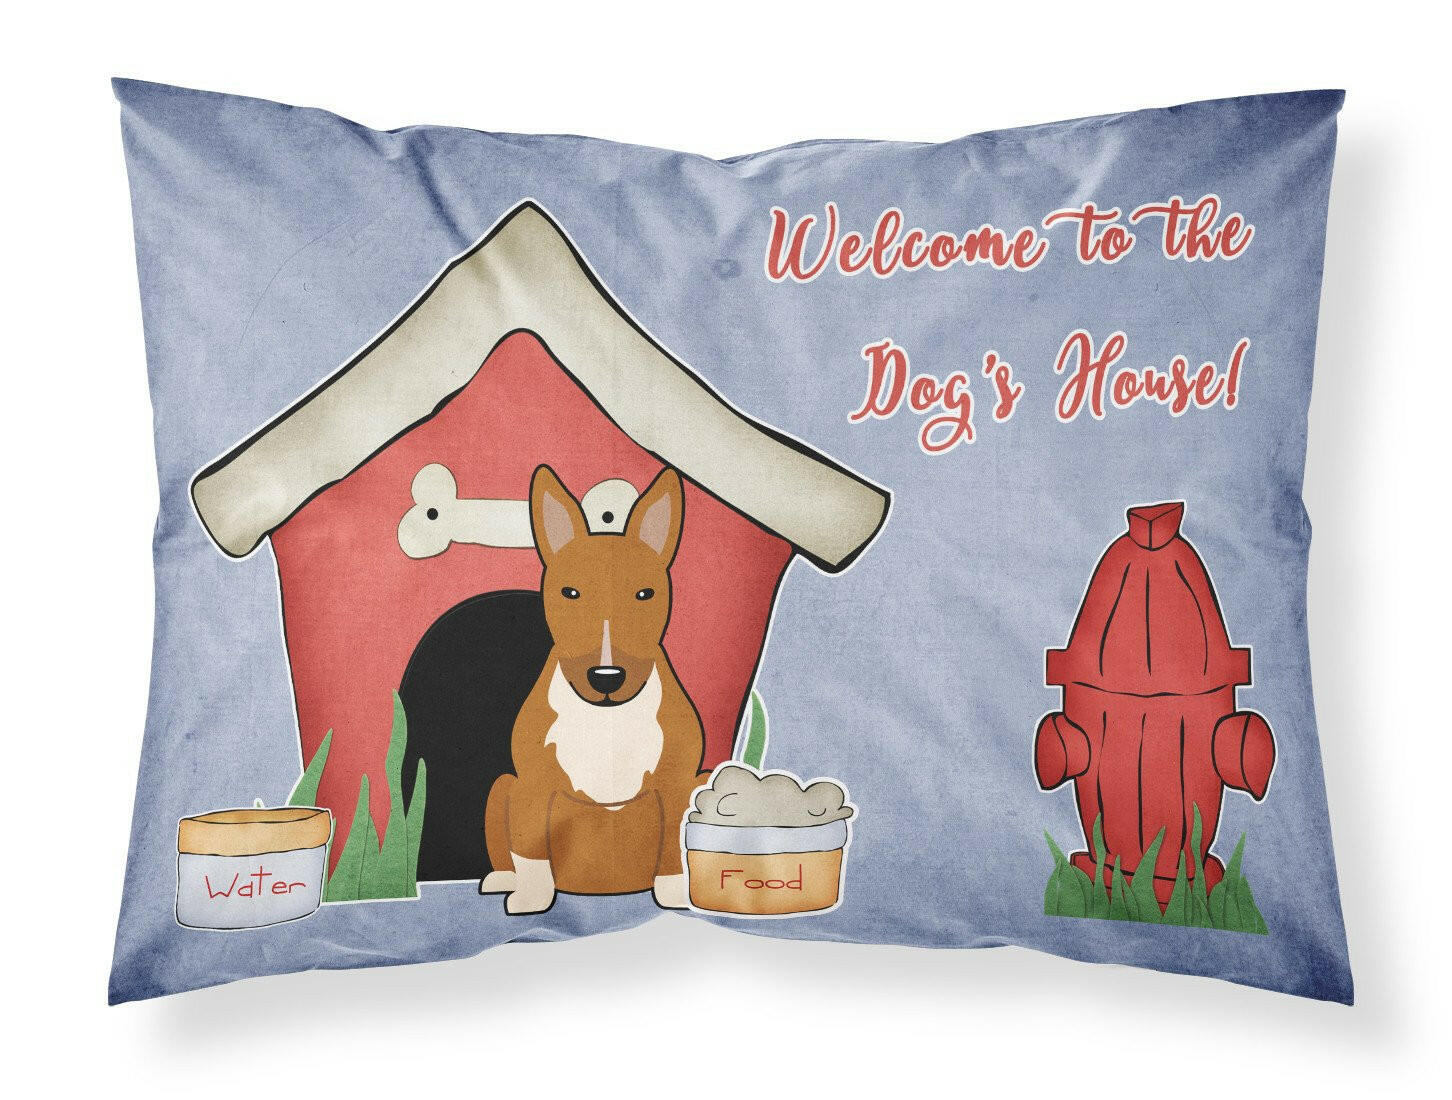 Dog House Collection Bull Terrier Red Fabric Standard Pillowcase BB2888PILLOWCASE by Caroline's Treasures